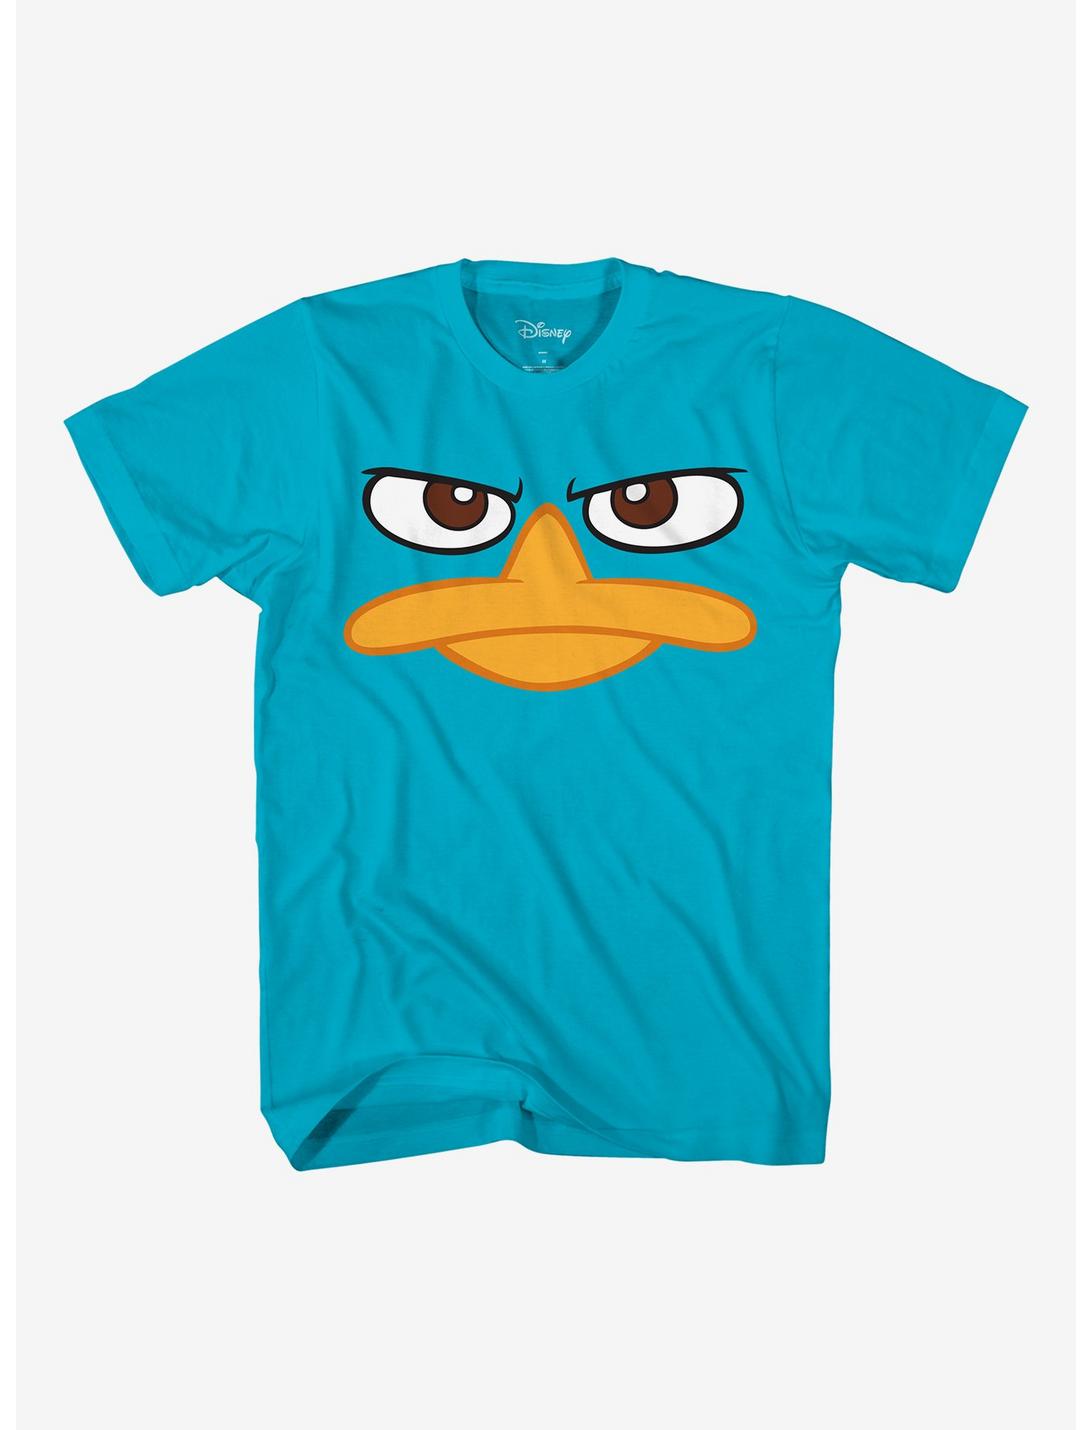 Disney Phineas And Ferb Perry T-Shirt, TEAL, hi-res